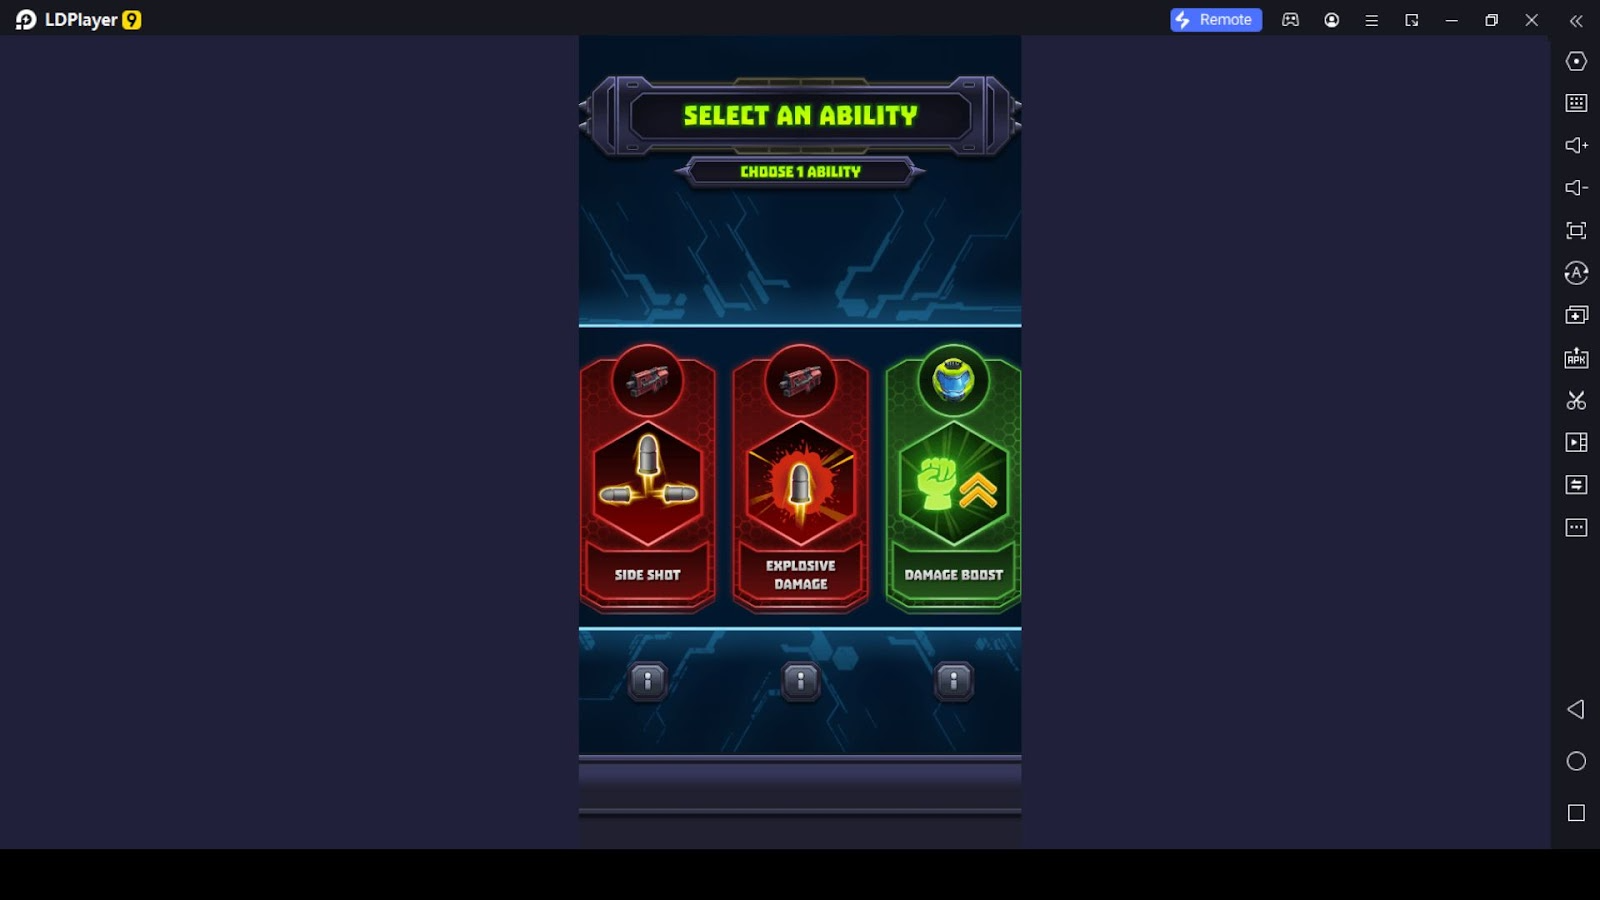 Mighty DOOM Abilities to Choose